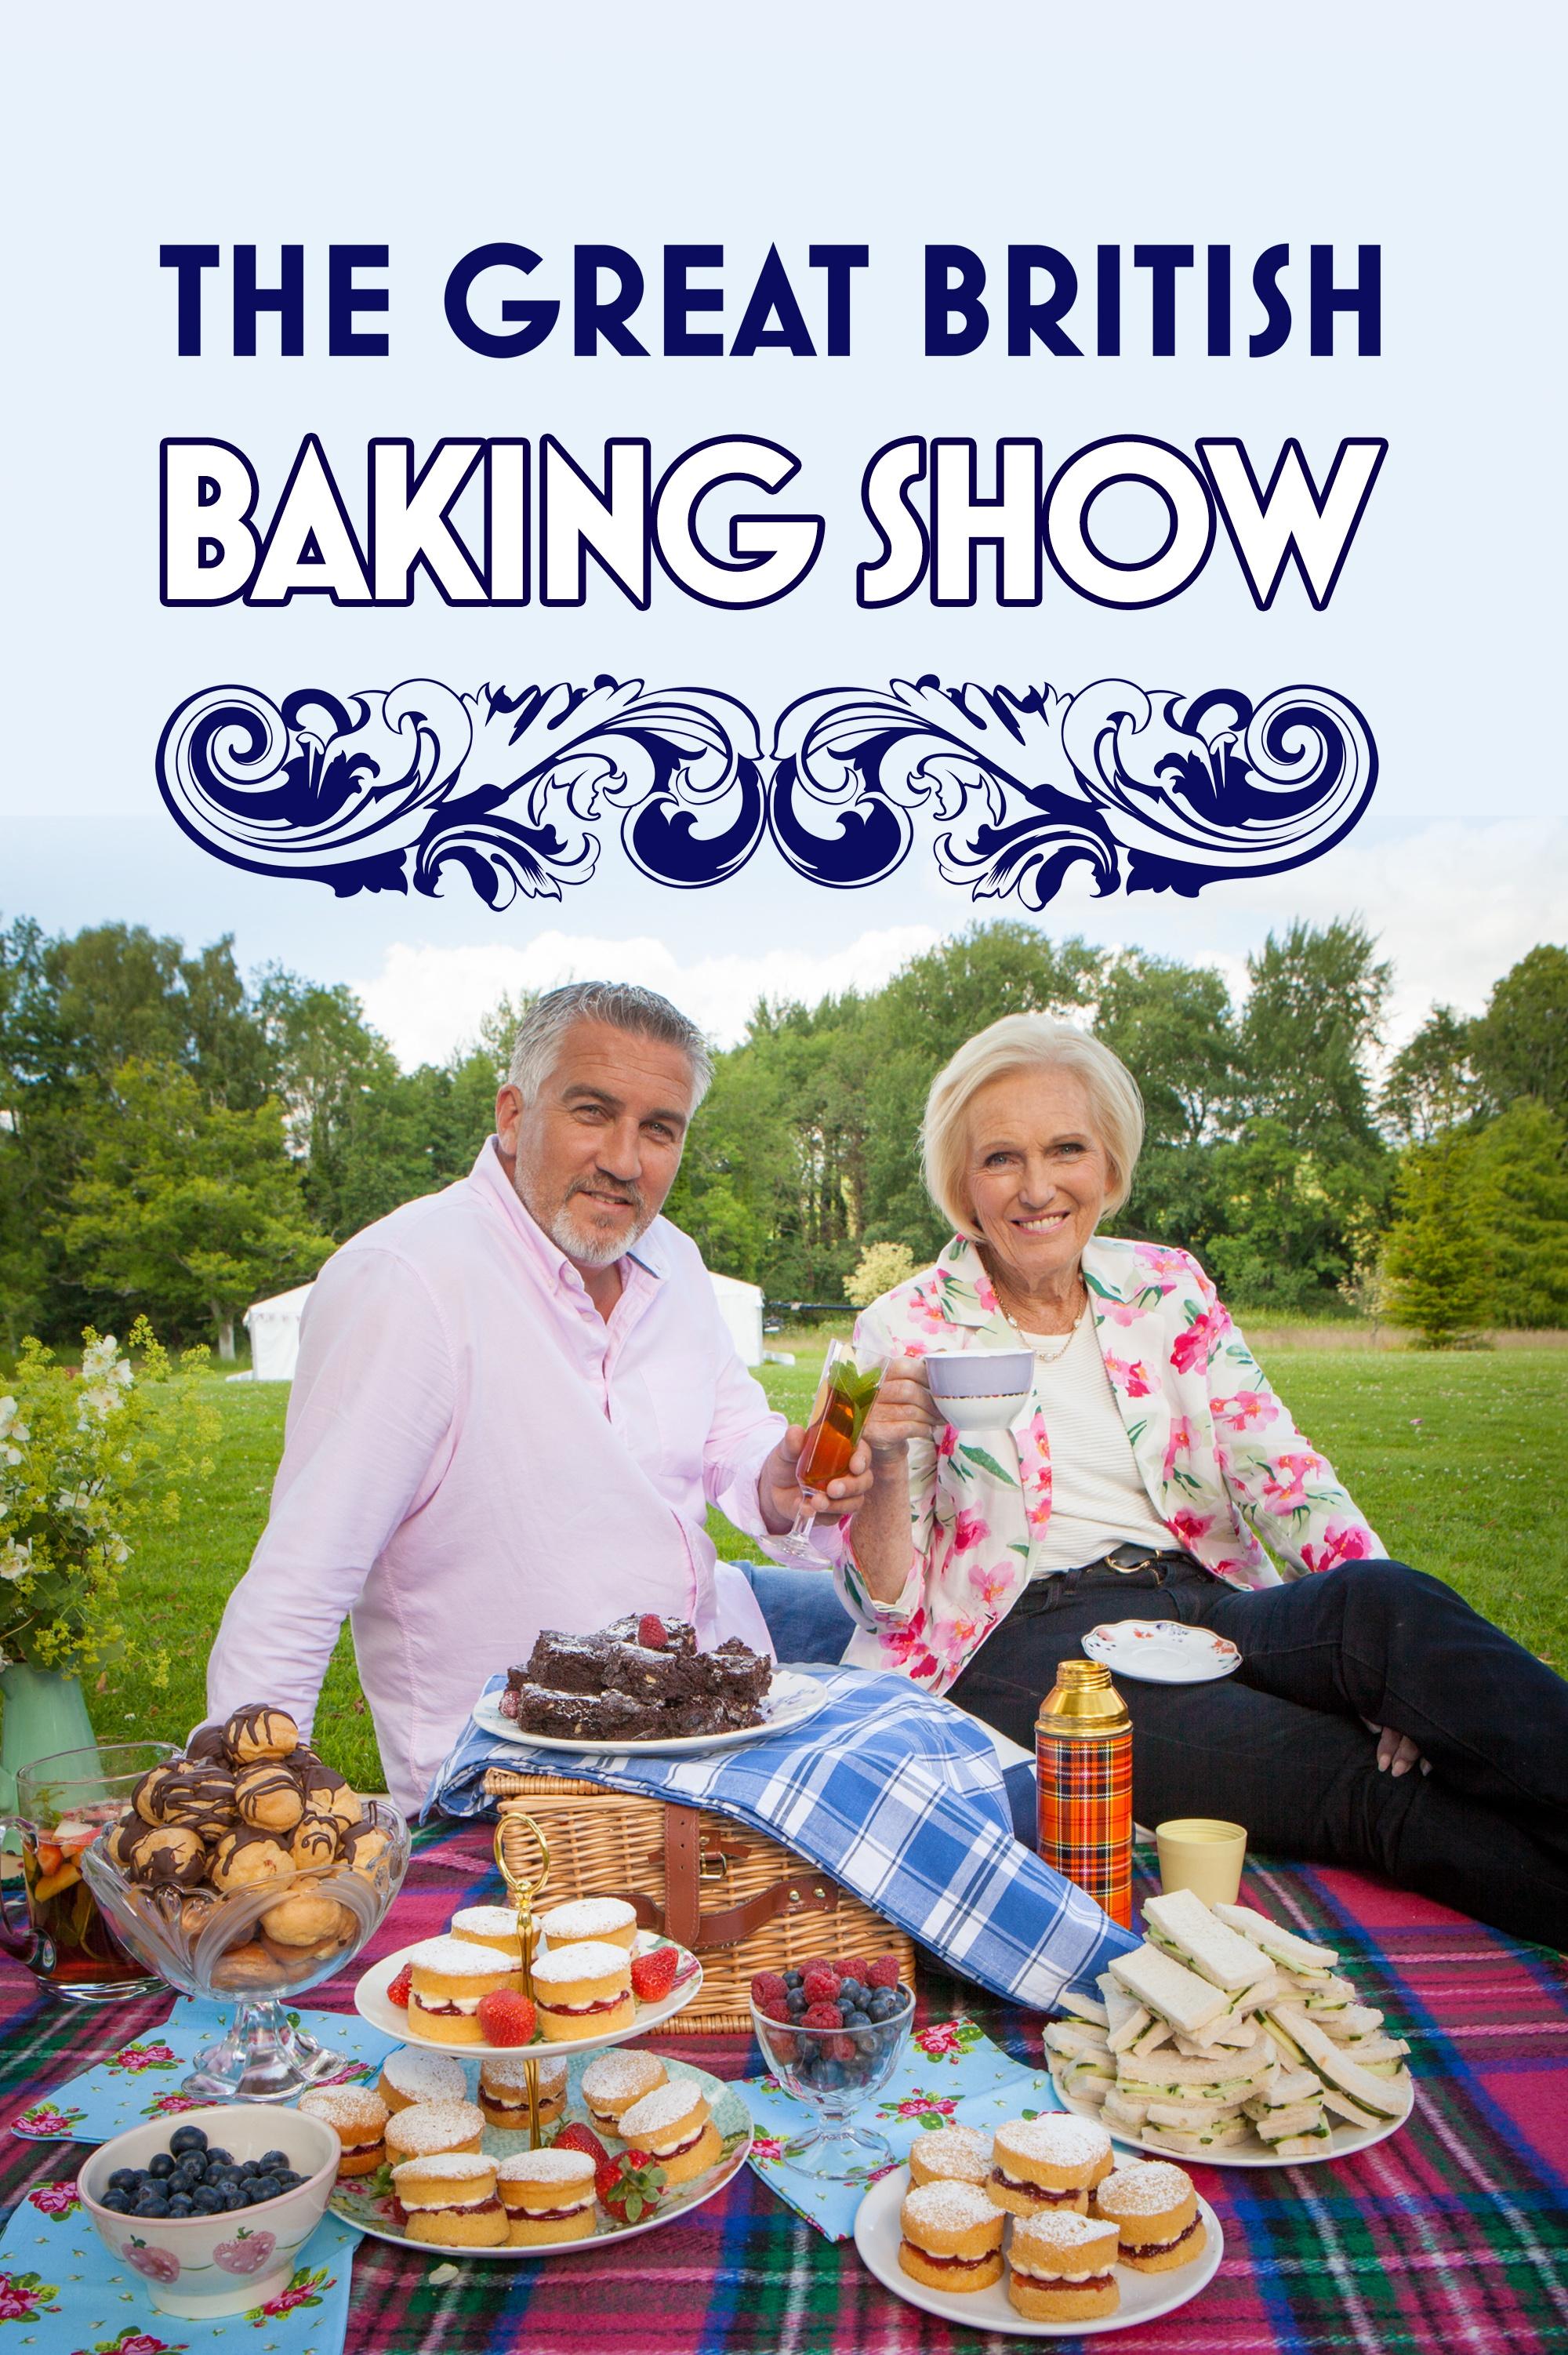 The Great British Baking Show | PBS